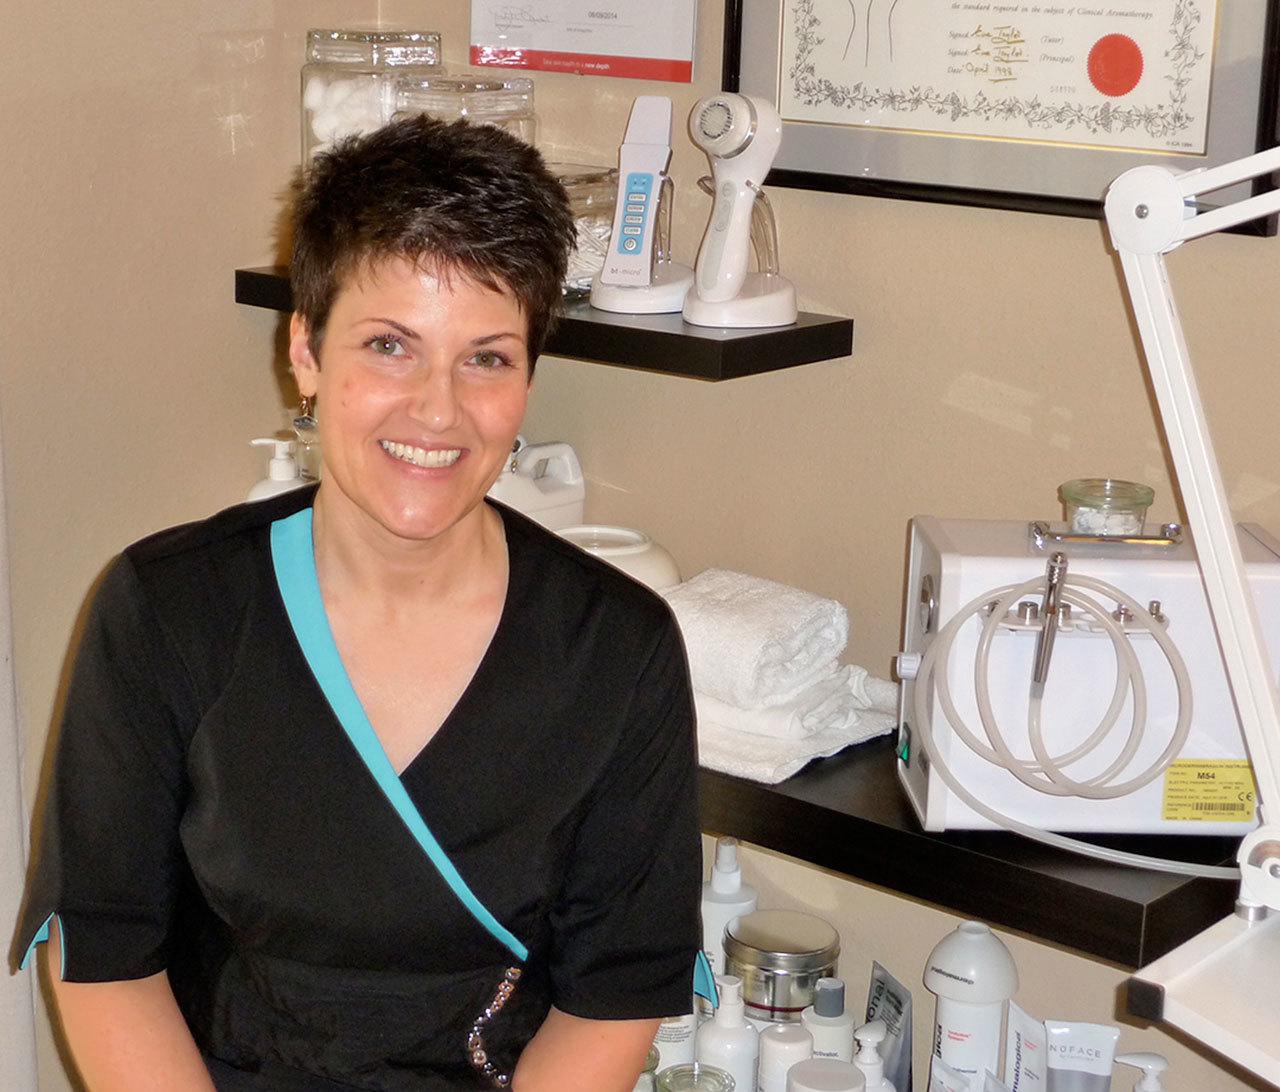 Jamie Wendorf brings nearly 25 years of experience as a skin care specialist to Sequim in her new business Sea Siren Skin Care. Sequim Gazette photo by Patricia Morrison Coate